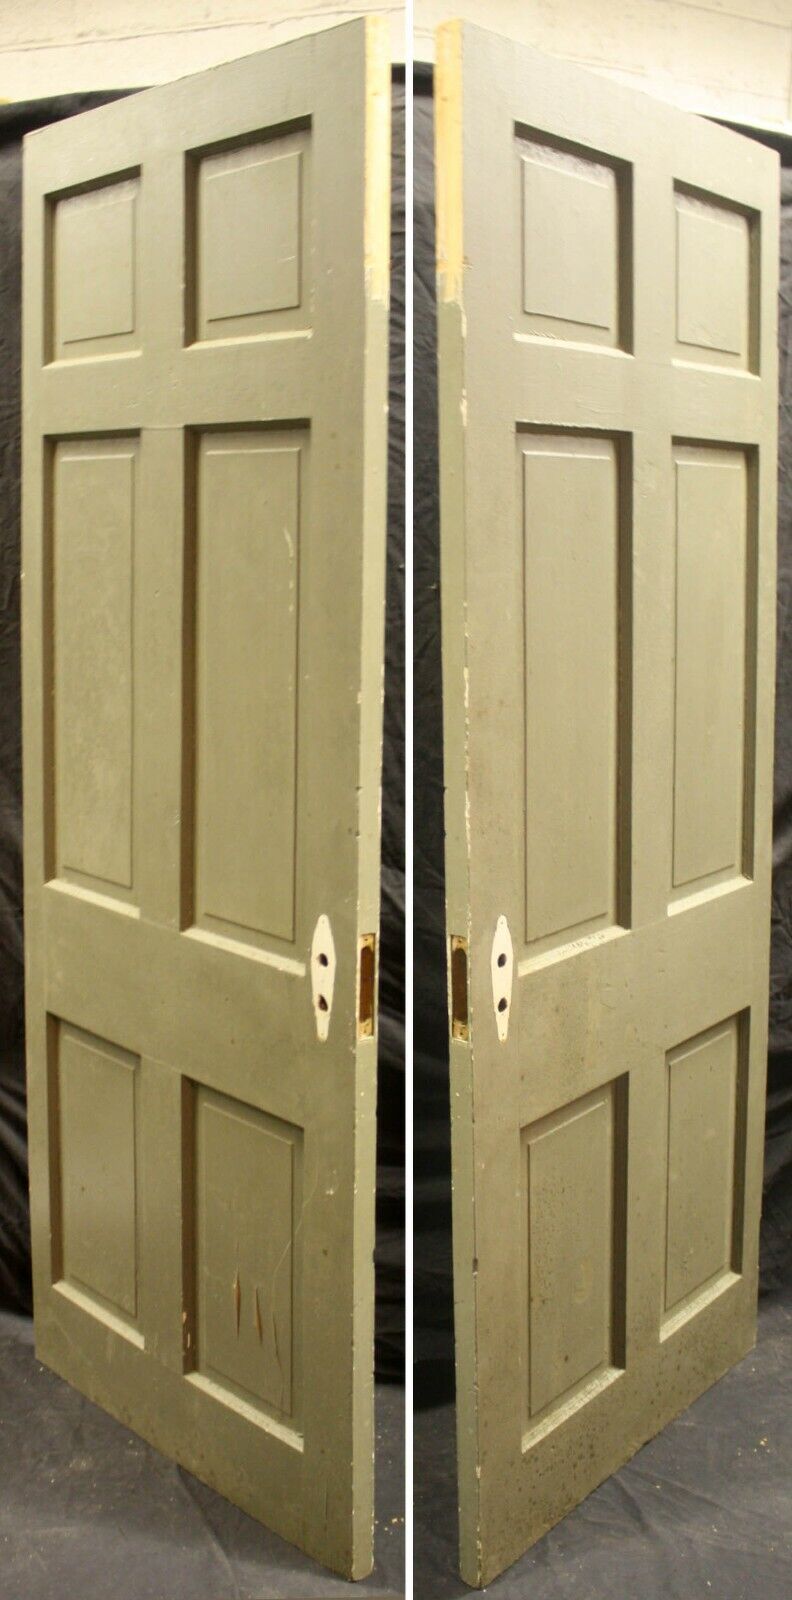 2 available 30"x79" Antique Vintage Old SOLID Colonial Interior SOLID Wood Wooden Door 6 Six Panels